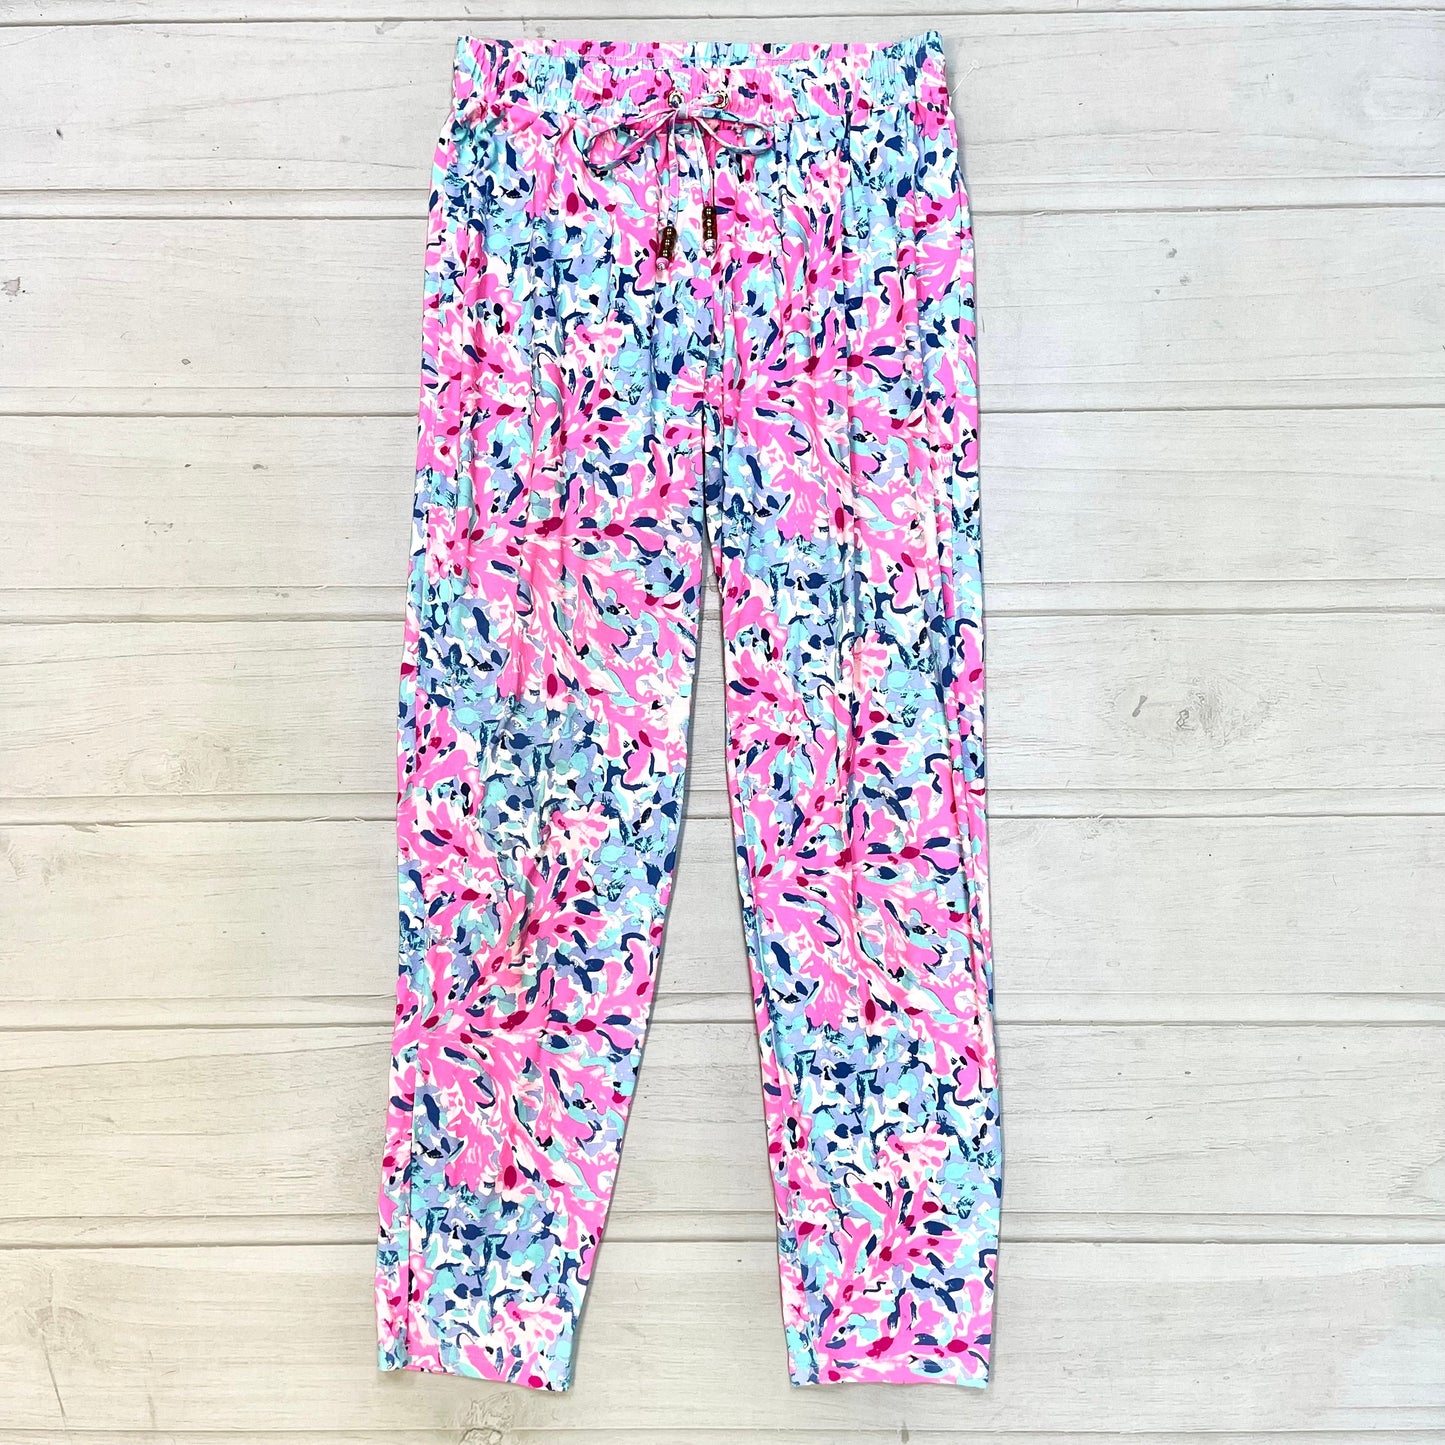 Pants Designer By Lilly Pulitzer  Size: S